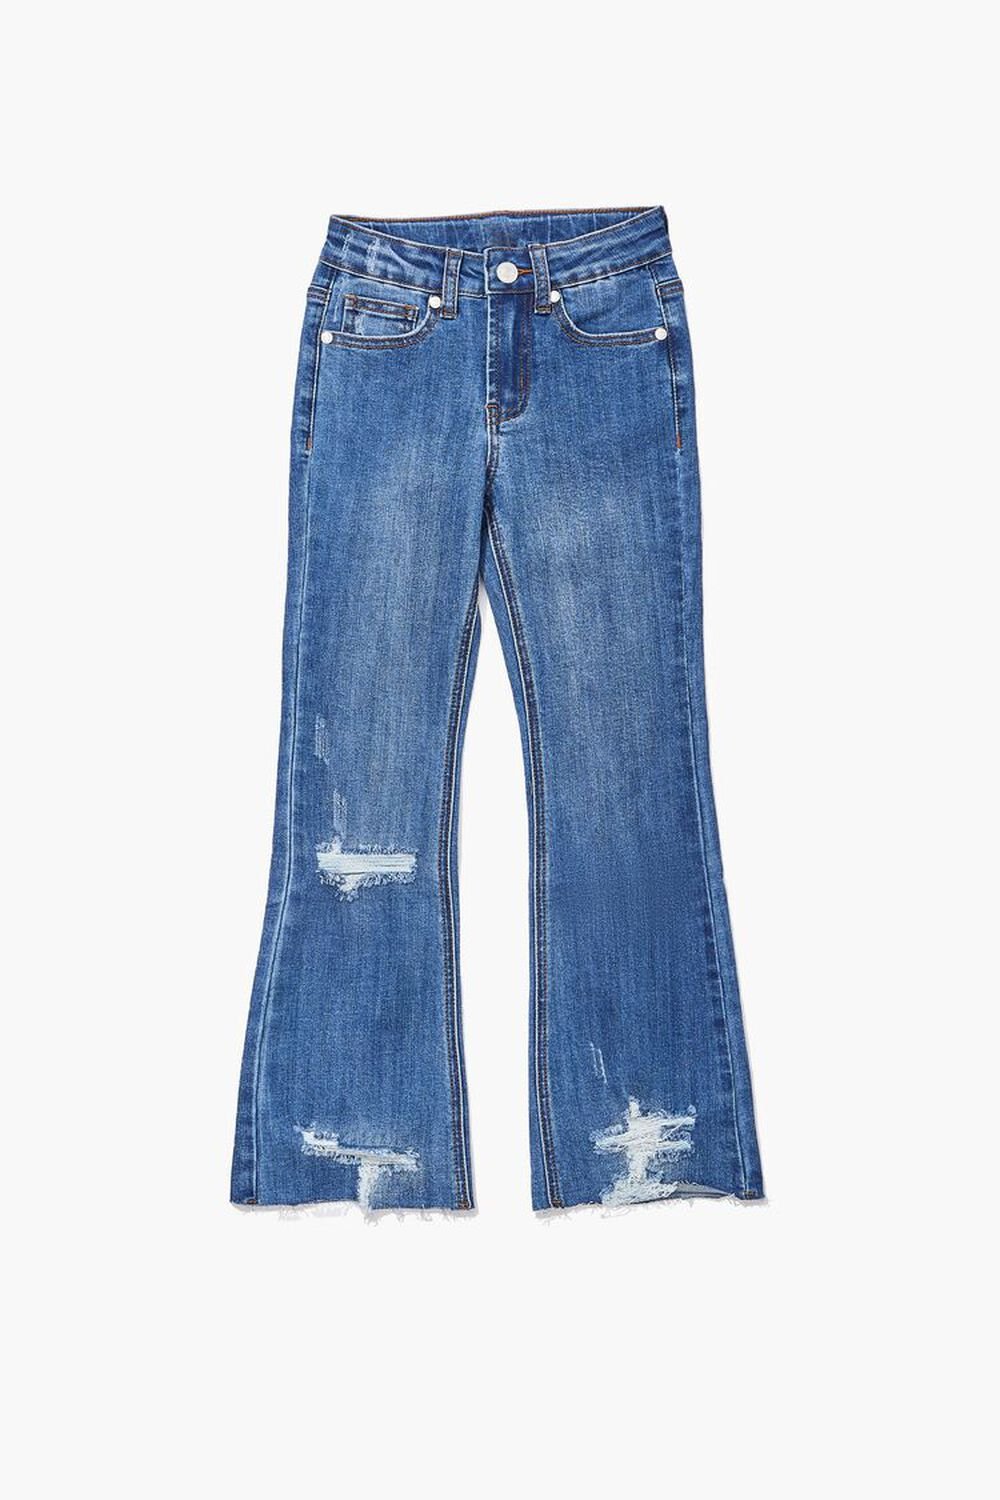 Girls Distressed Flare Jeans (Kids), image 1